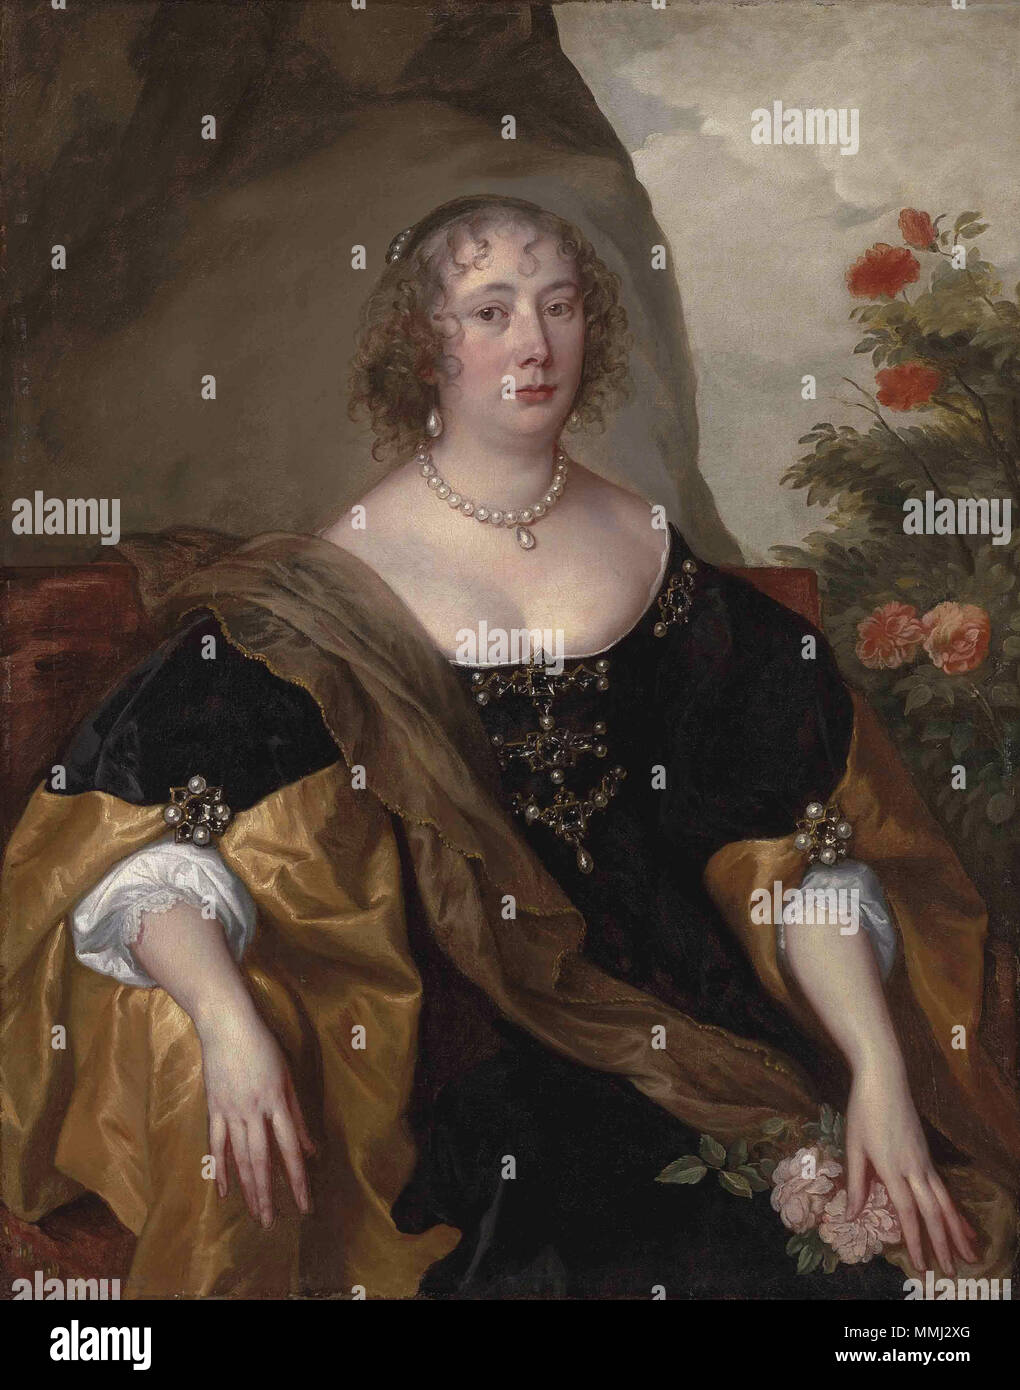 . Beatrice, Countess of Oxford, wife of Robert de Vere, 19th Earl of Oxford and daughter of Sierck van Hemmema of an ancient family from Berlikum in Friesland  . 17th century.   Anthony van Dyck  (1599–1641)      Alternative names Anthony van Dyck, Anthonie van Dyck, Anton van Dijck, Antonis van Deik, Antoon van Dijk, Anthonis van Dyck, Antoine van Dyck  Description Flemish painter, draughtsman and printmaker  Date of birth/death 22 March 1599 9 December 1641  Location of birth/death Antwerp Blackfriars, London  Work location Antwerp (1609–1610, 1615–1620), London (1620-March 1621), Zaventem ( Stock Photo